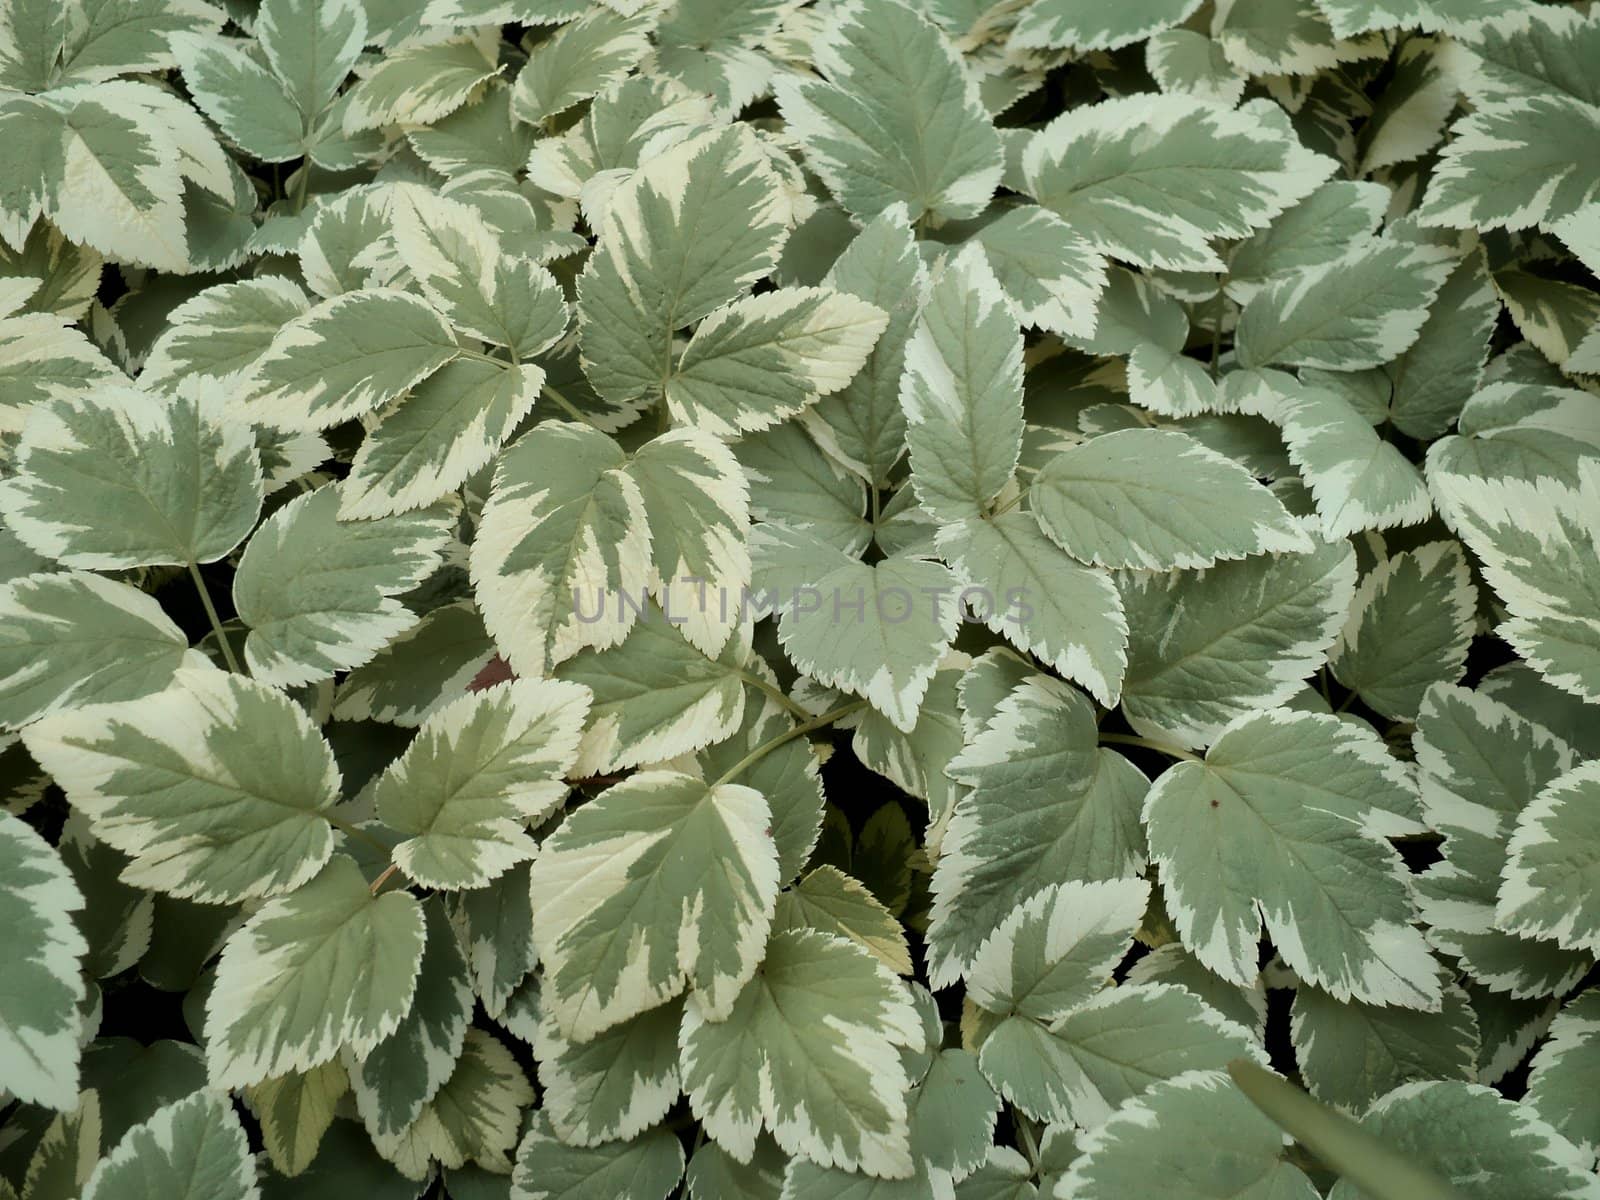 General view of the green leaves of field plants